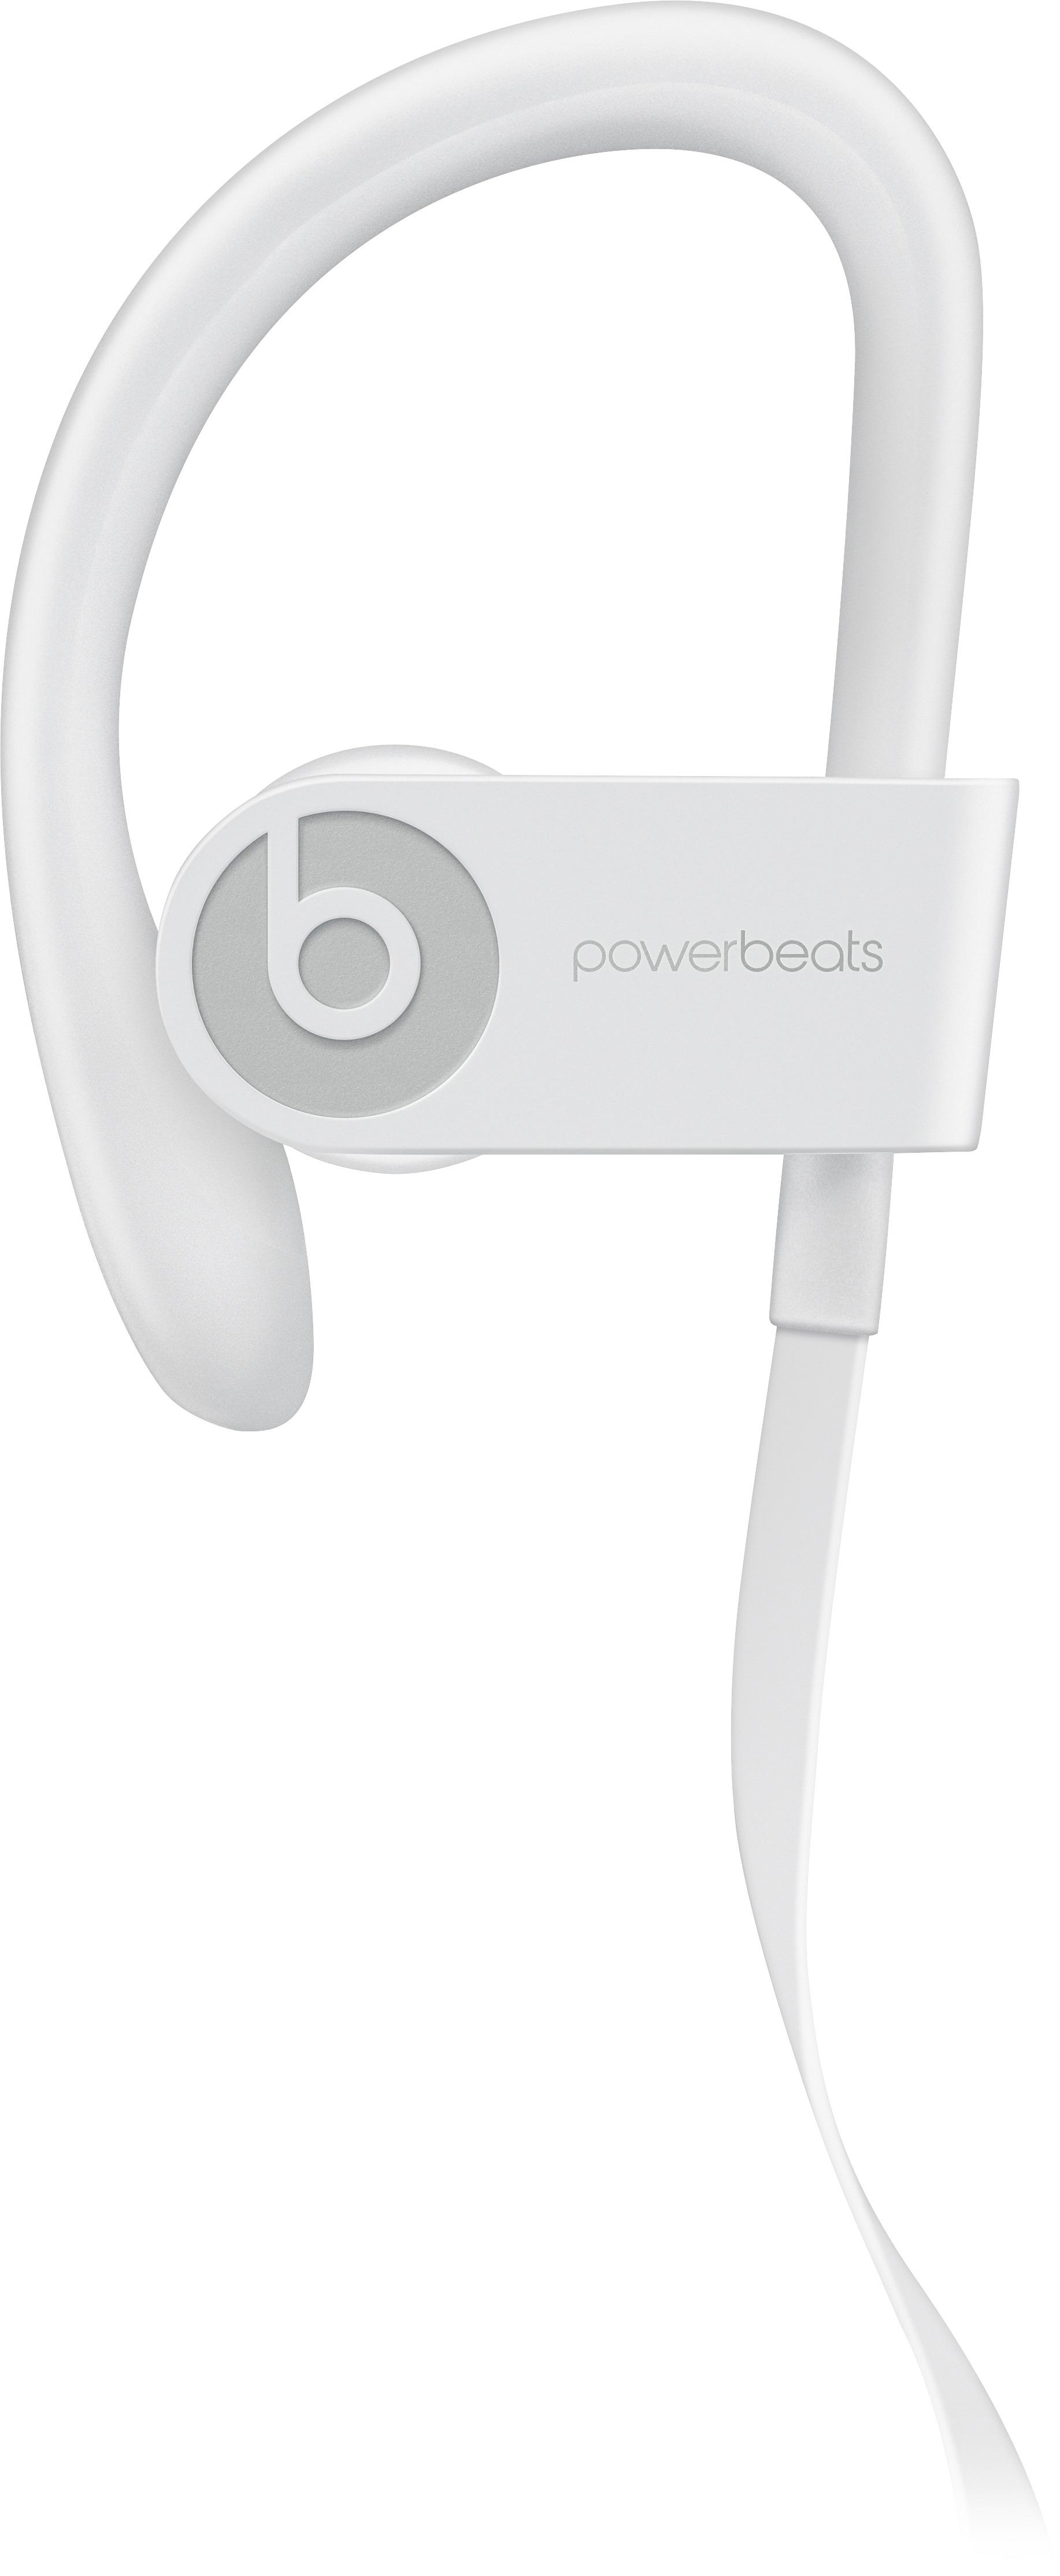 Beats by Dr. Dre - Geek Squad Certified Refurbished PowerbeatsÂ³ Wireless - White was $199.99 now $74.99 (63.0% off)